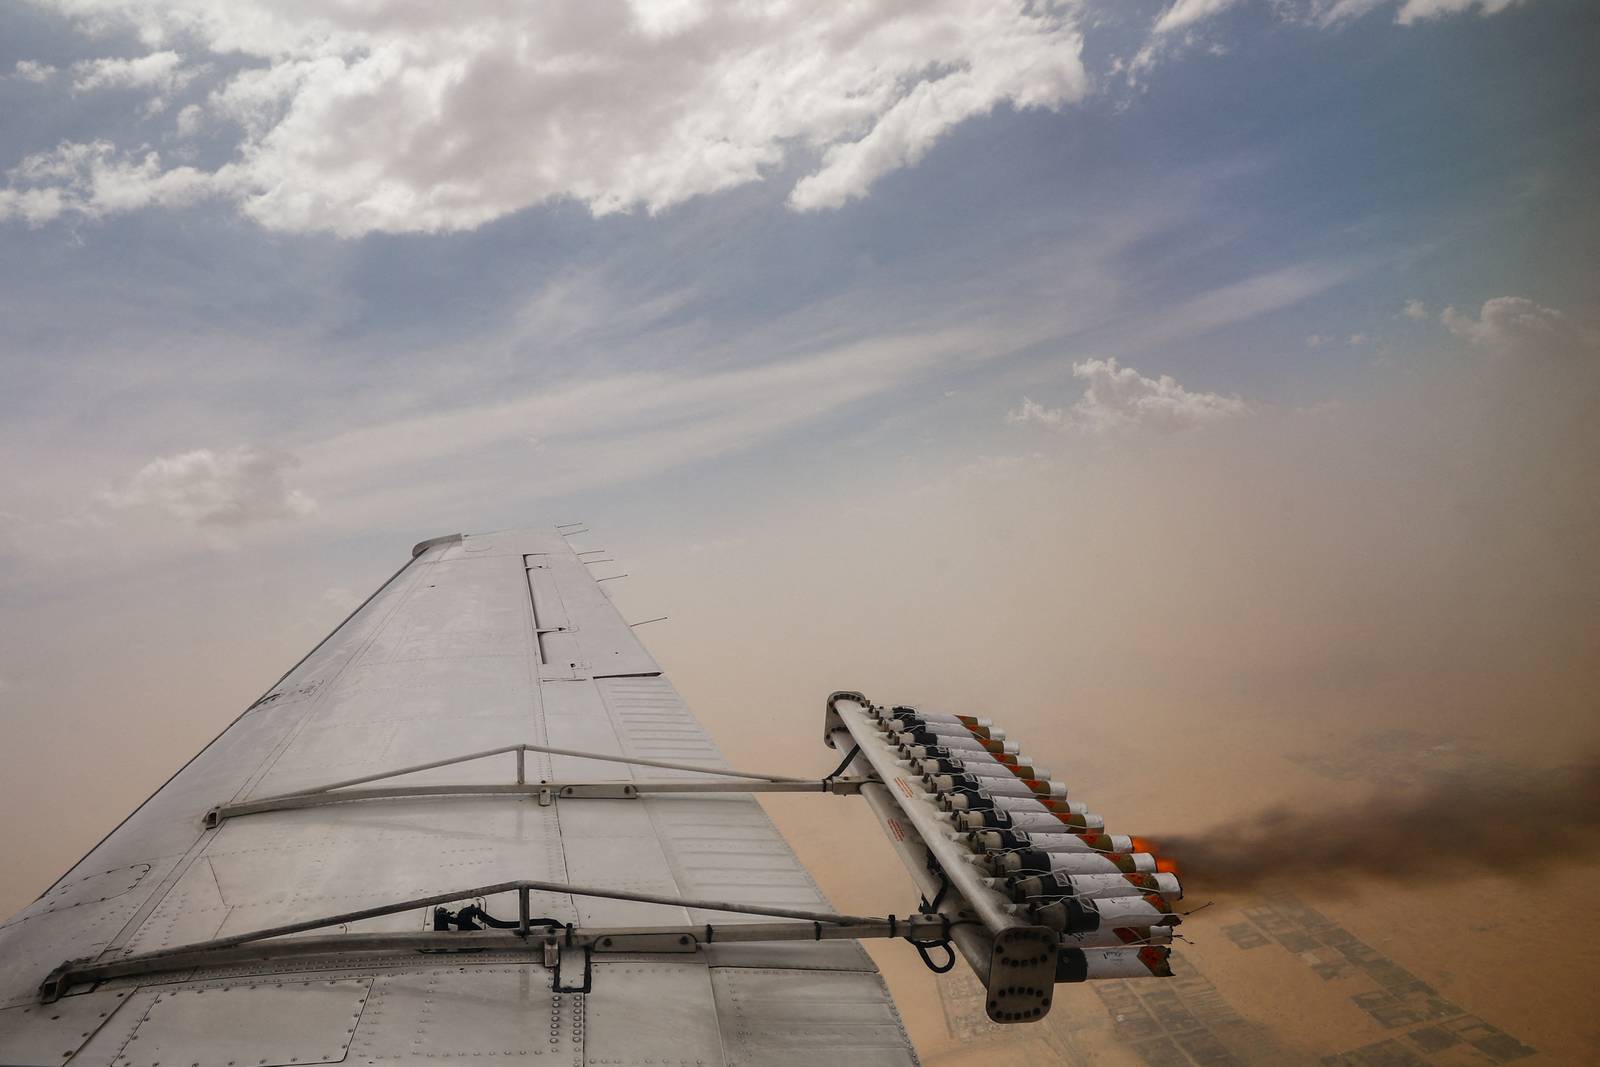 Cloud seeding in the UAE in pictures